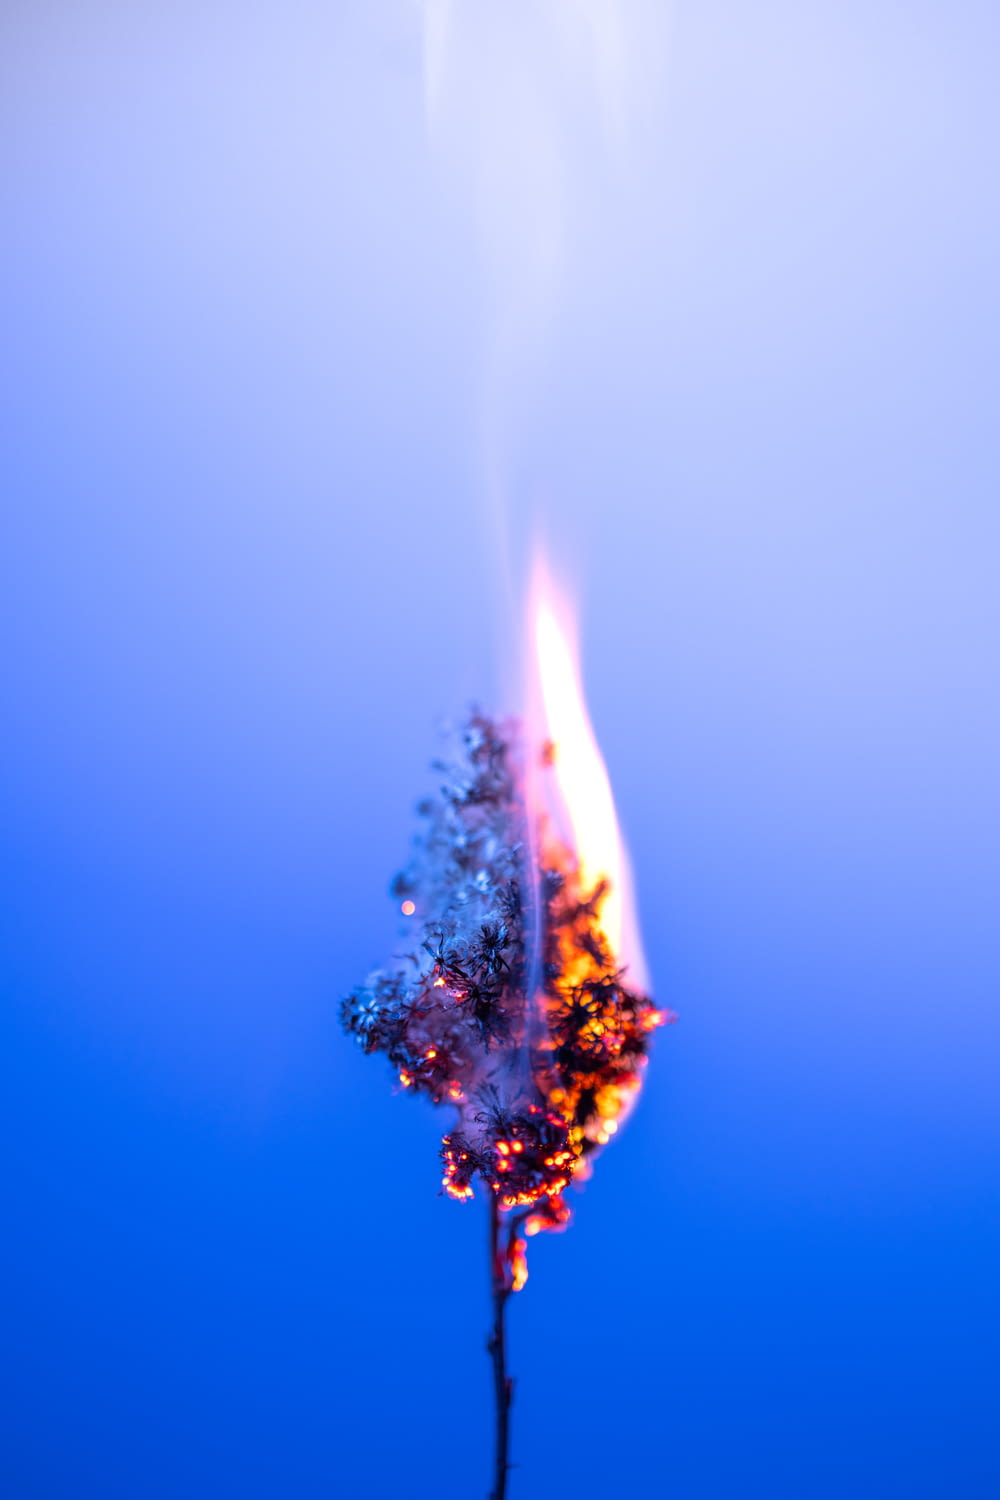 a close up of a fire with a blue sky in the background